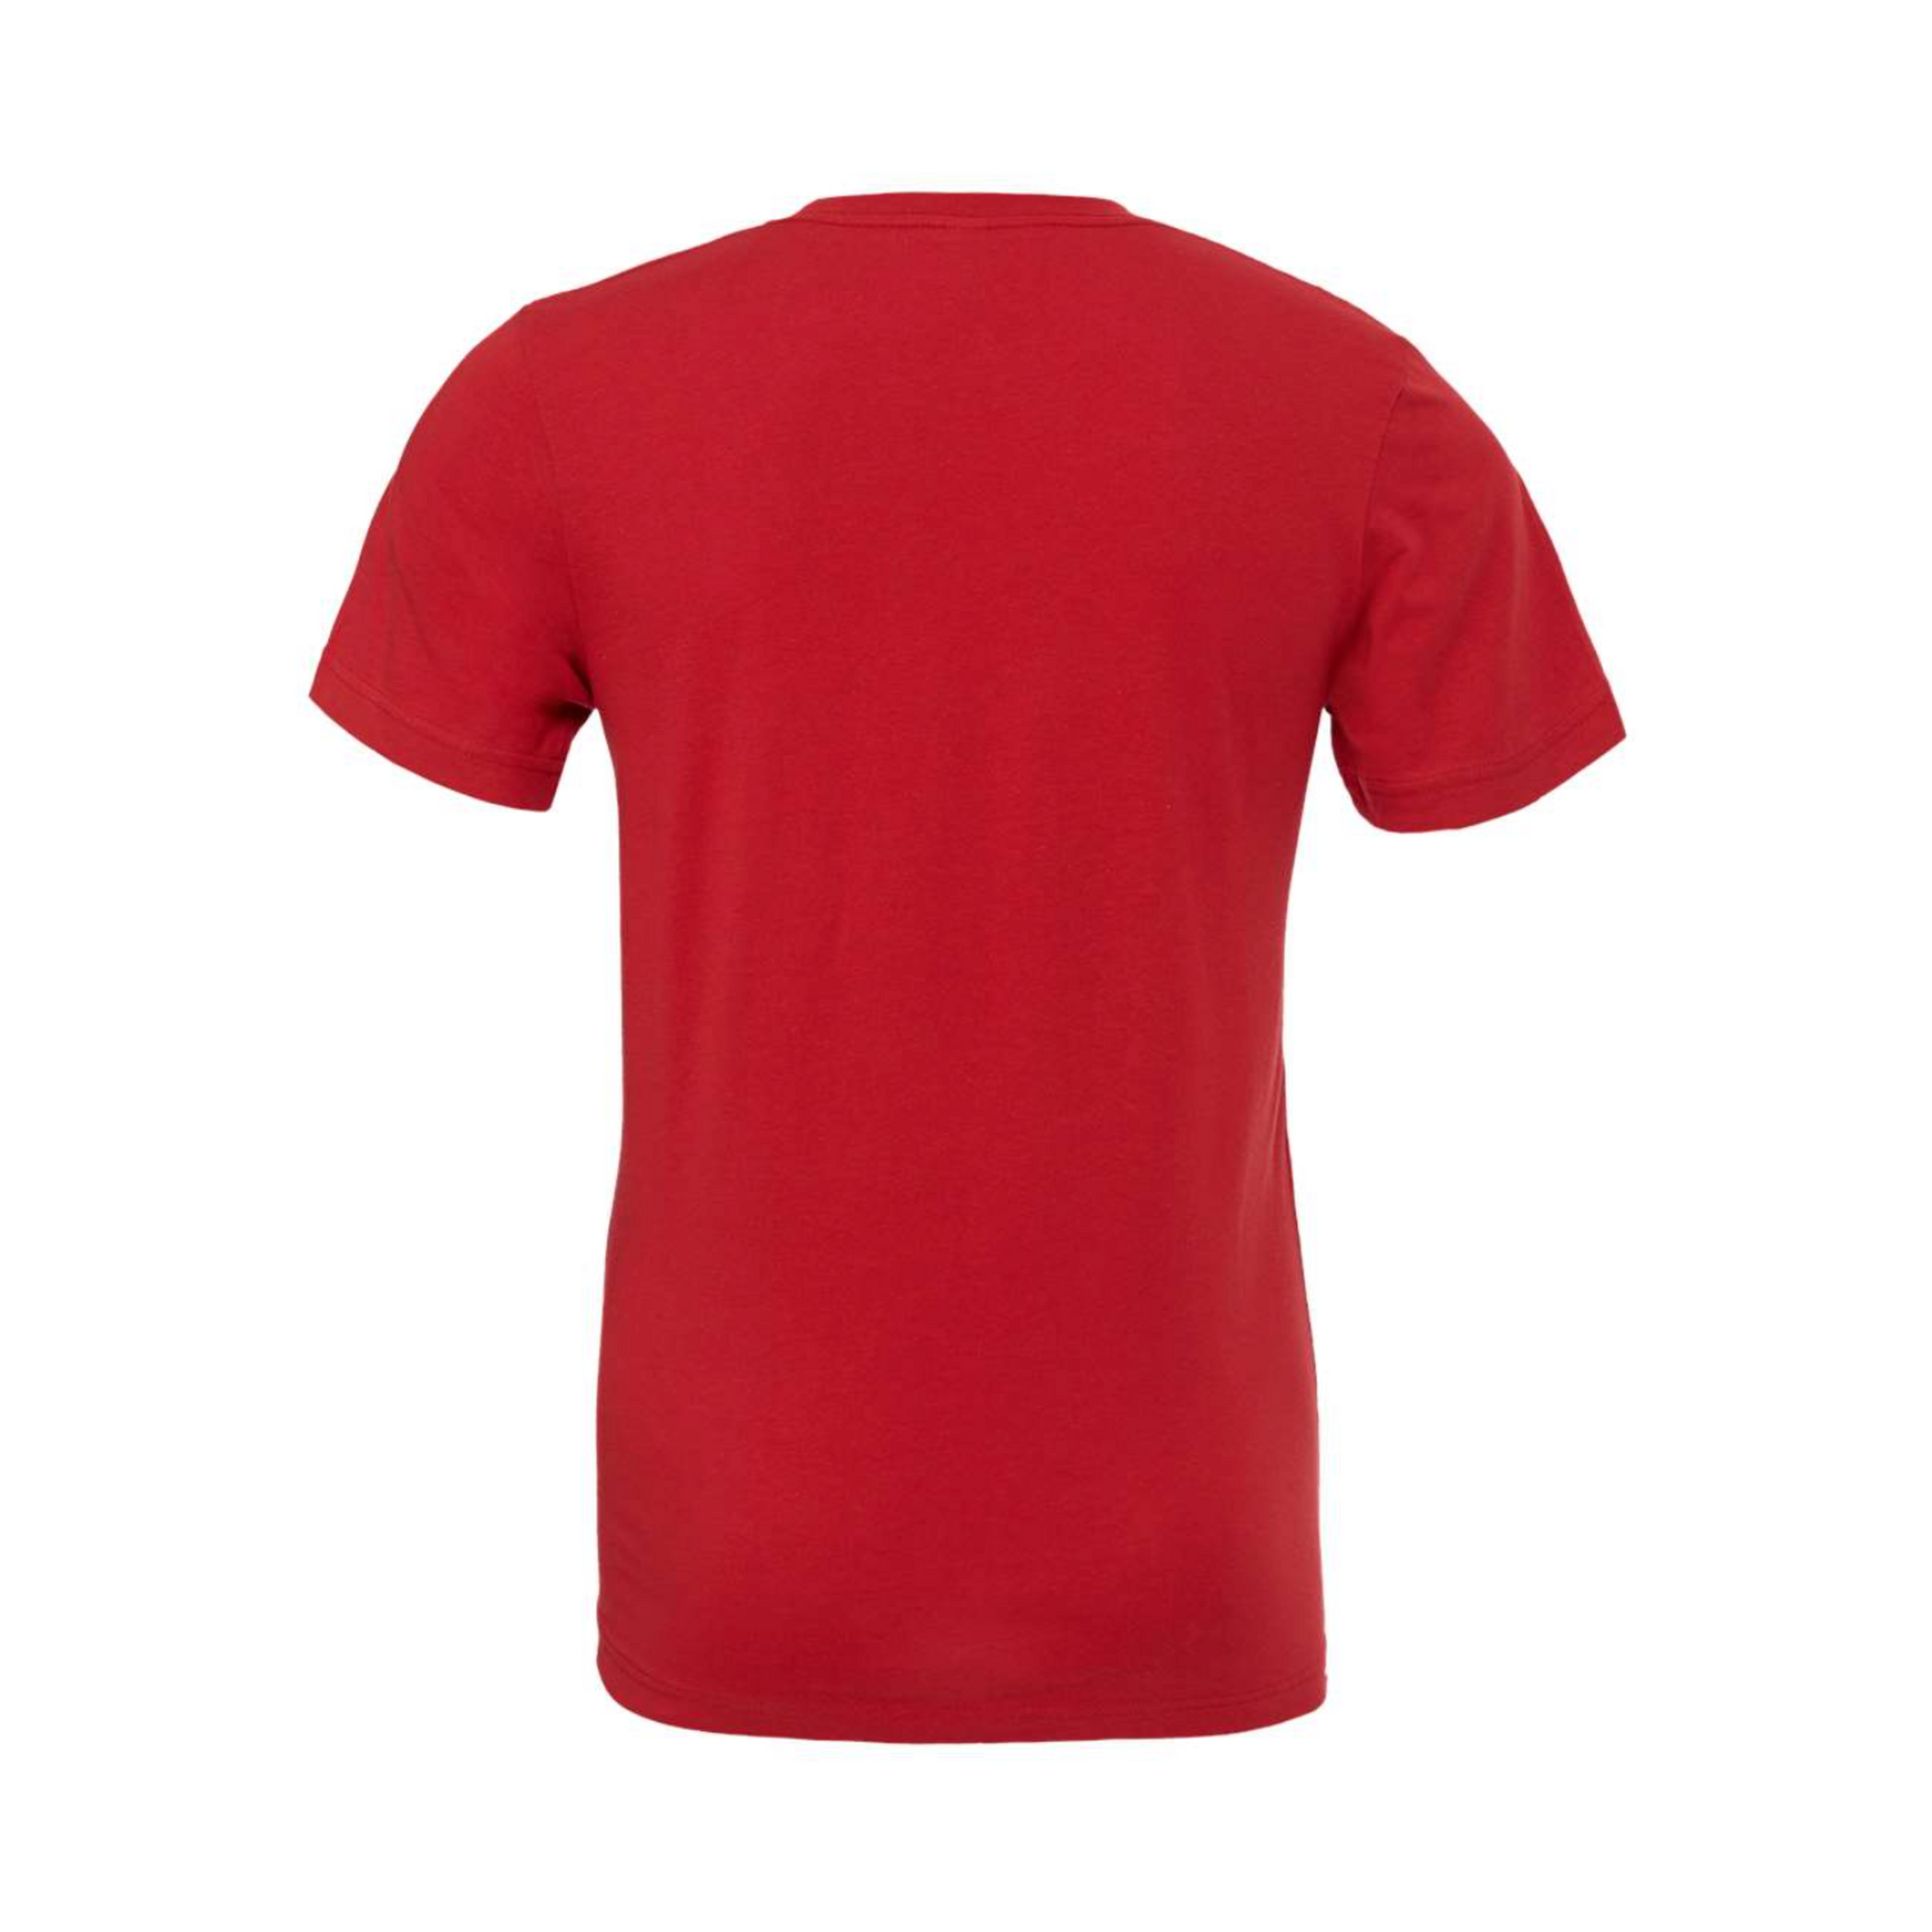 Official Cookie Tester - Red T-Shirt with white writing - Back View